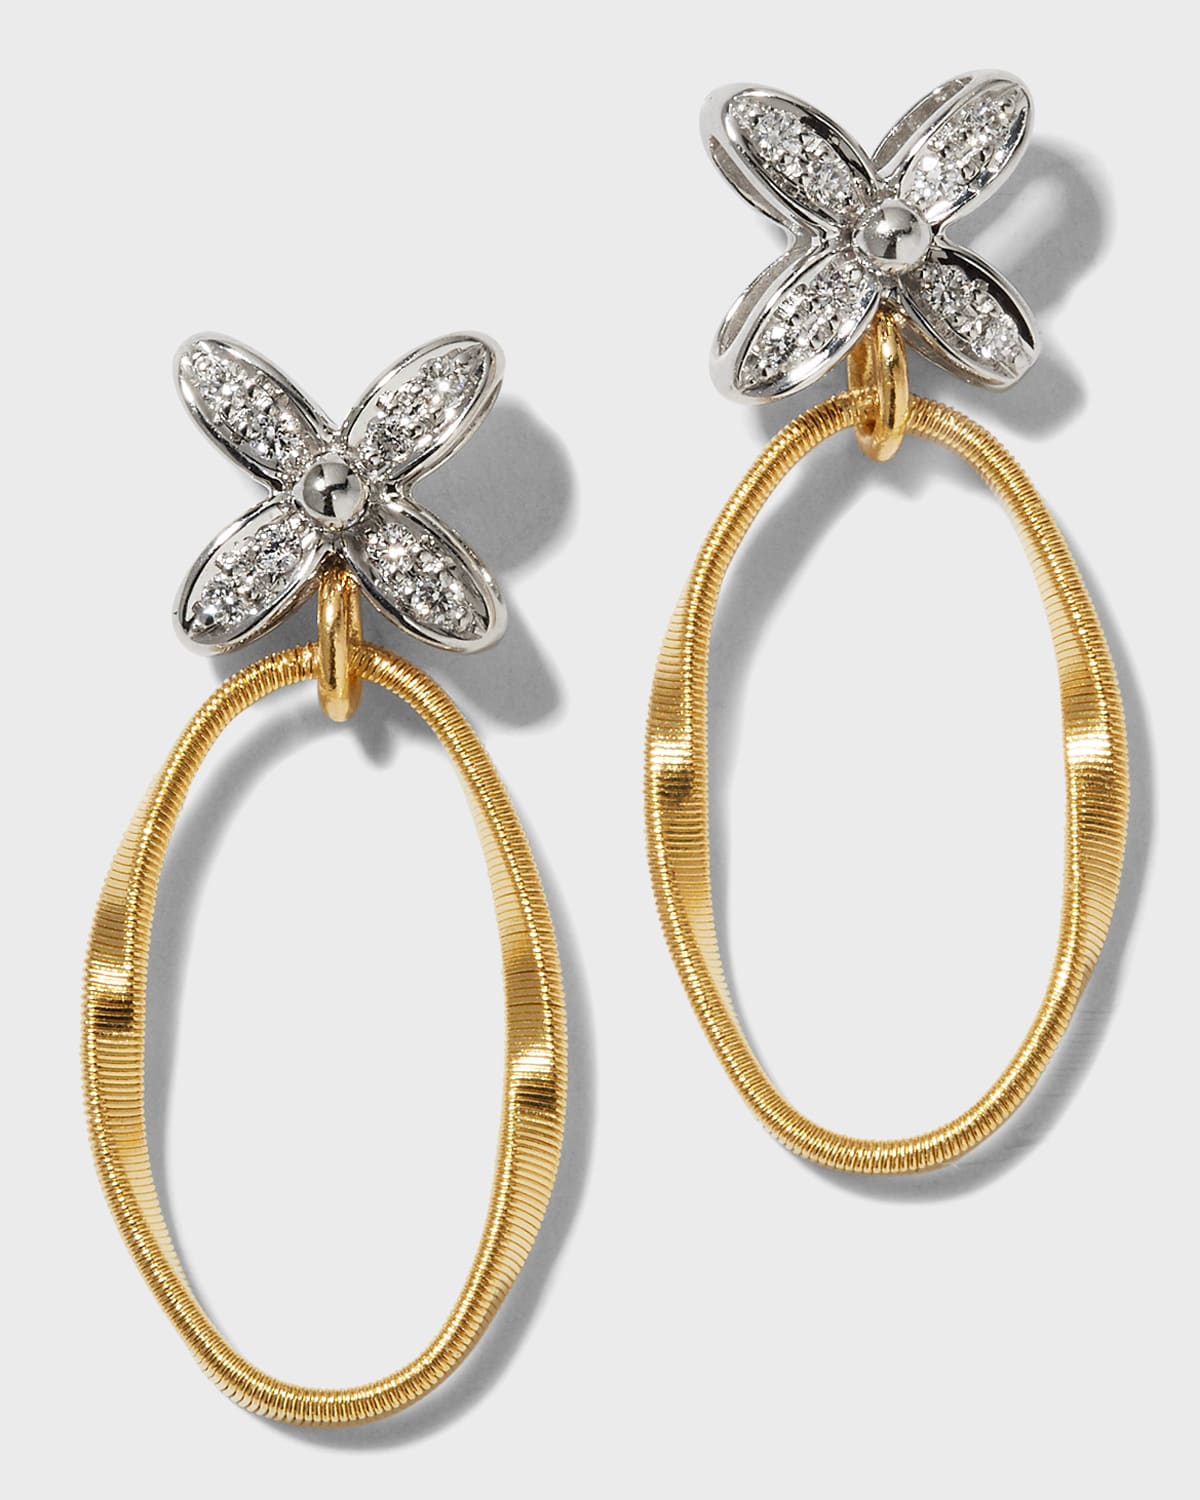 MARCO BICEGO MARRAKECH ONDE 18K YELLOW AND WHITE GOLD STUD DROP EARRINGS